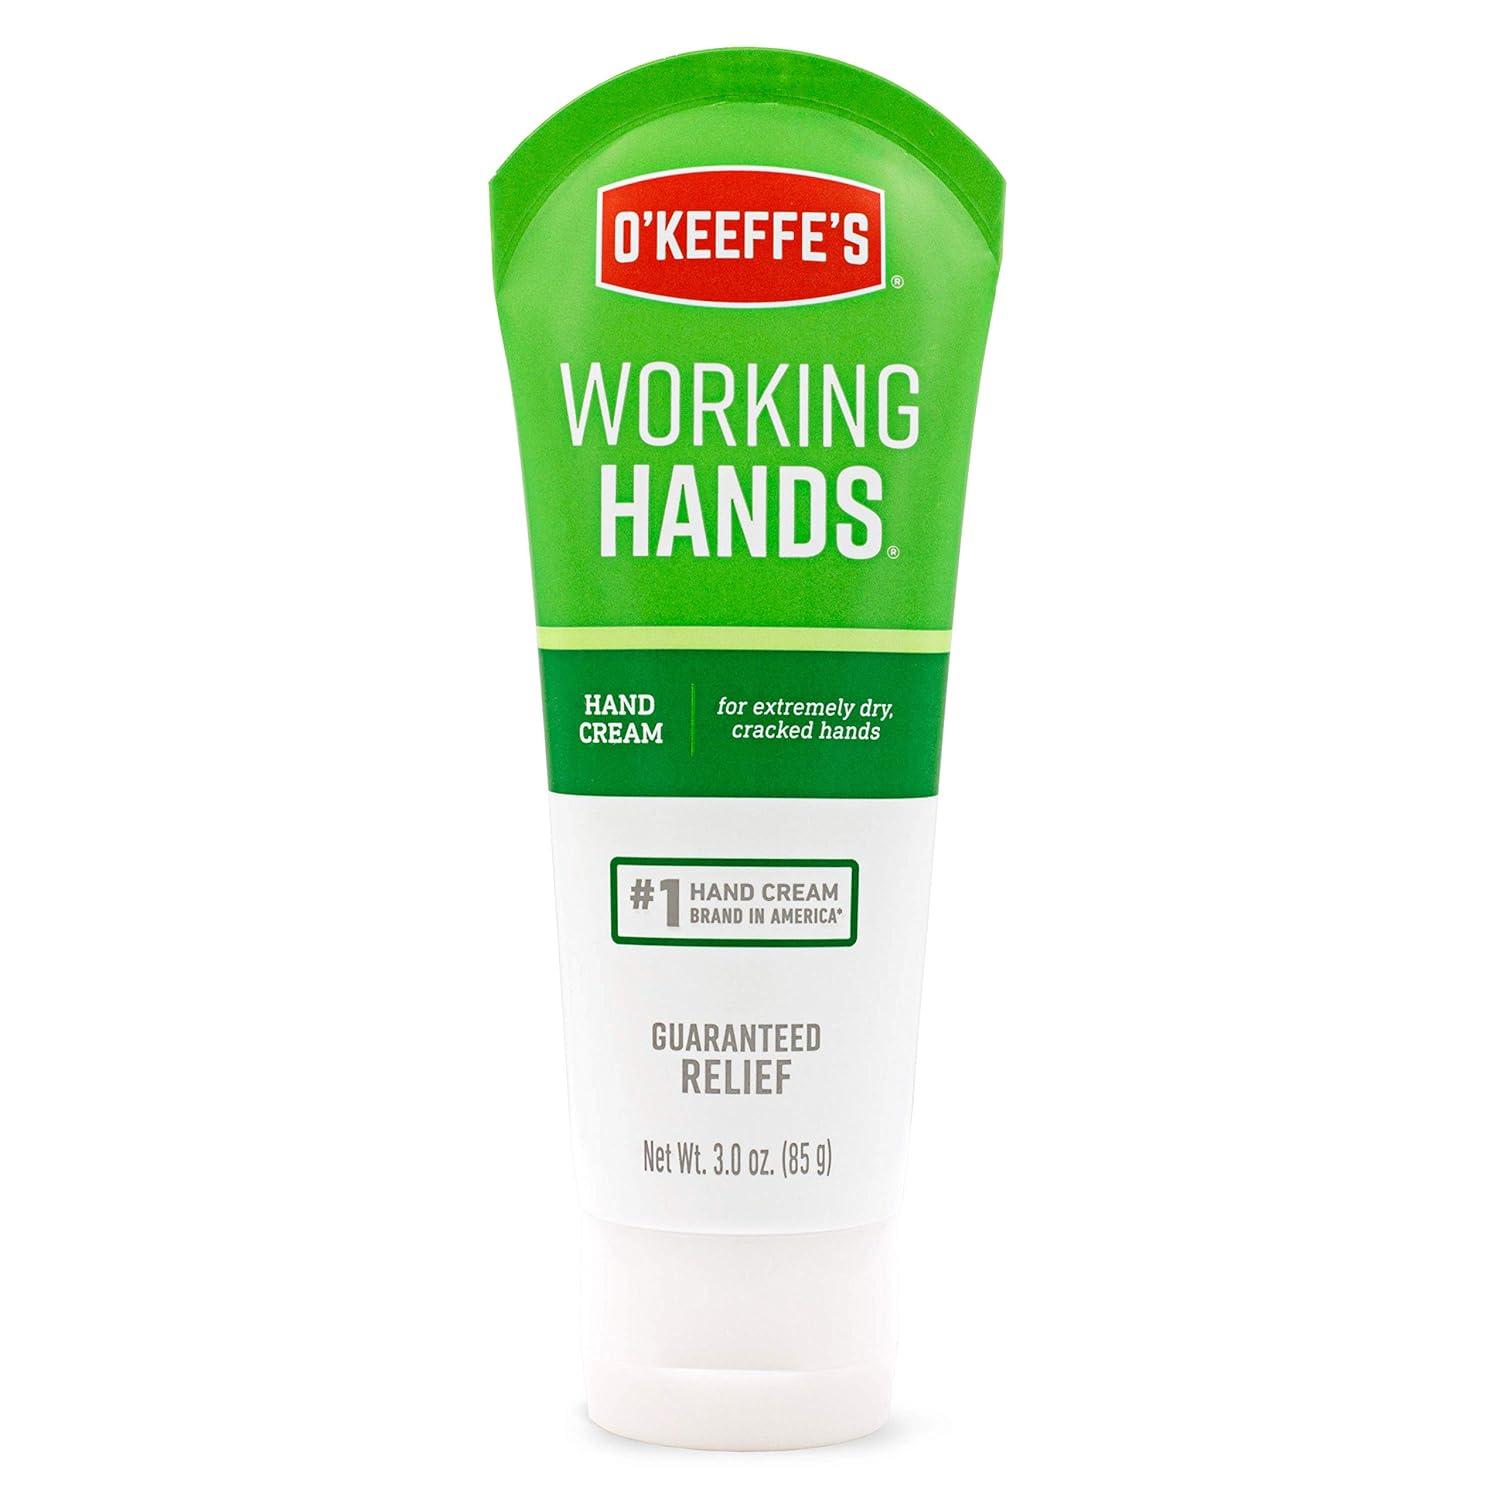 For DRY HandsO'Keeffe's 'Working Hands' SOAP 